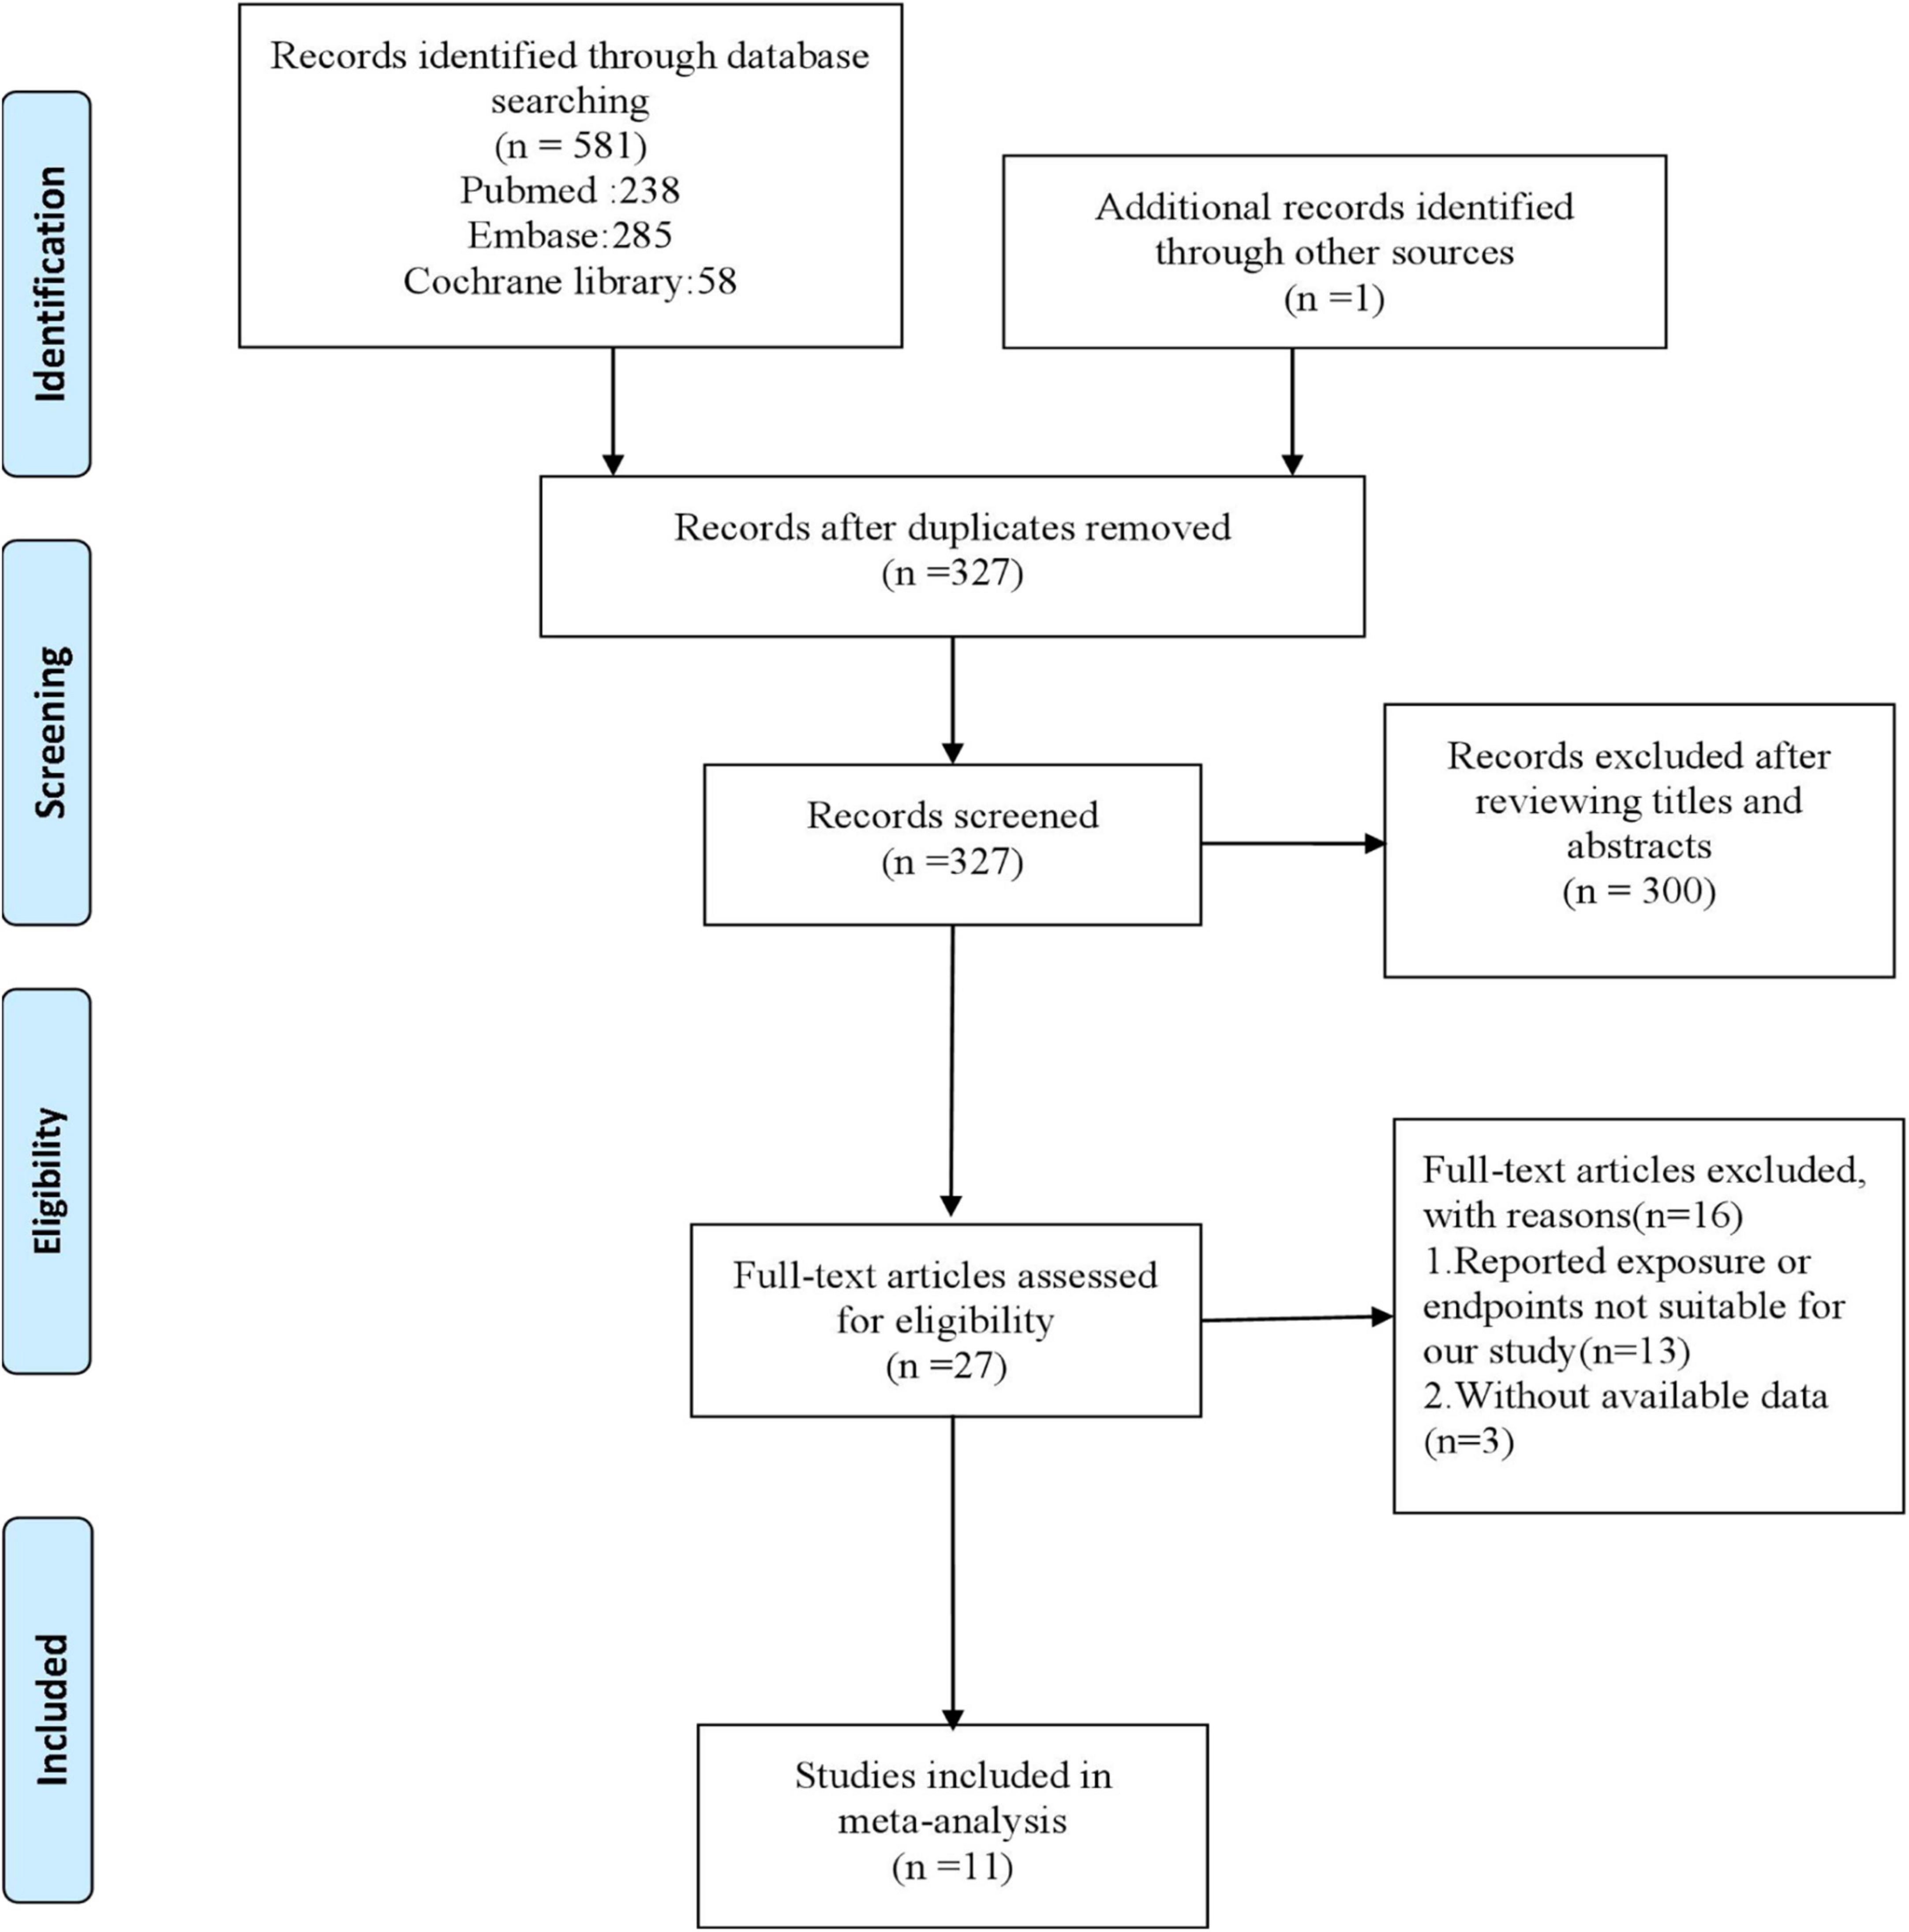 Association of renin–angiotensin system inhibitors use with short- and long-term mortality in patients with aortic stenosis: A systematic review and meta-analysis